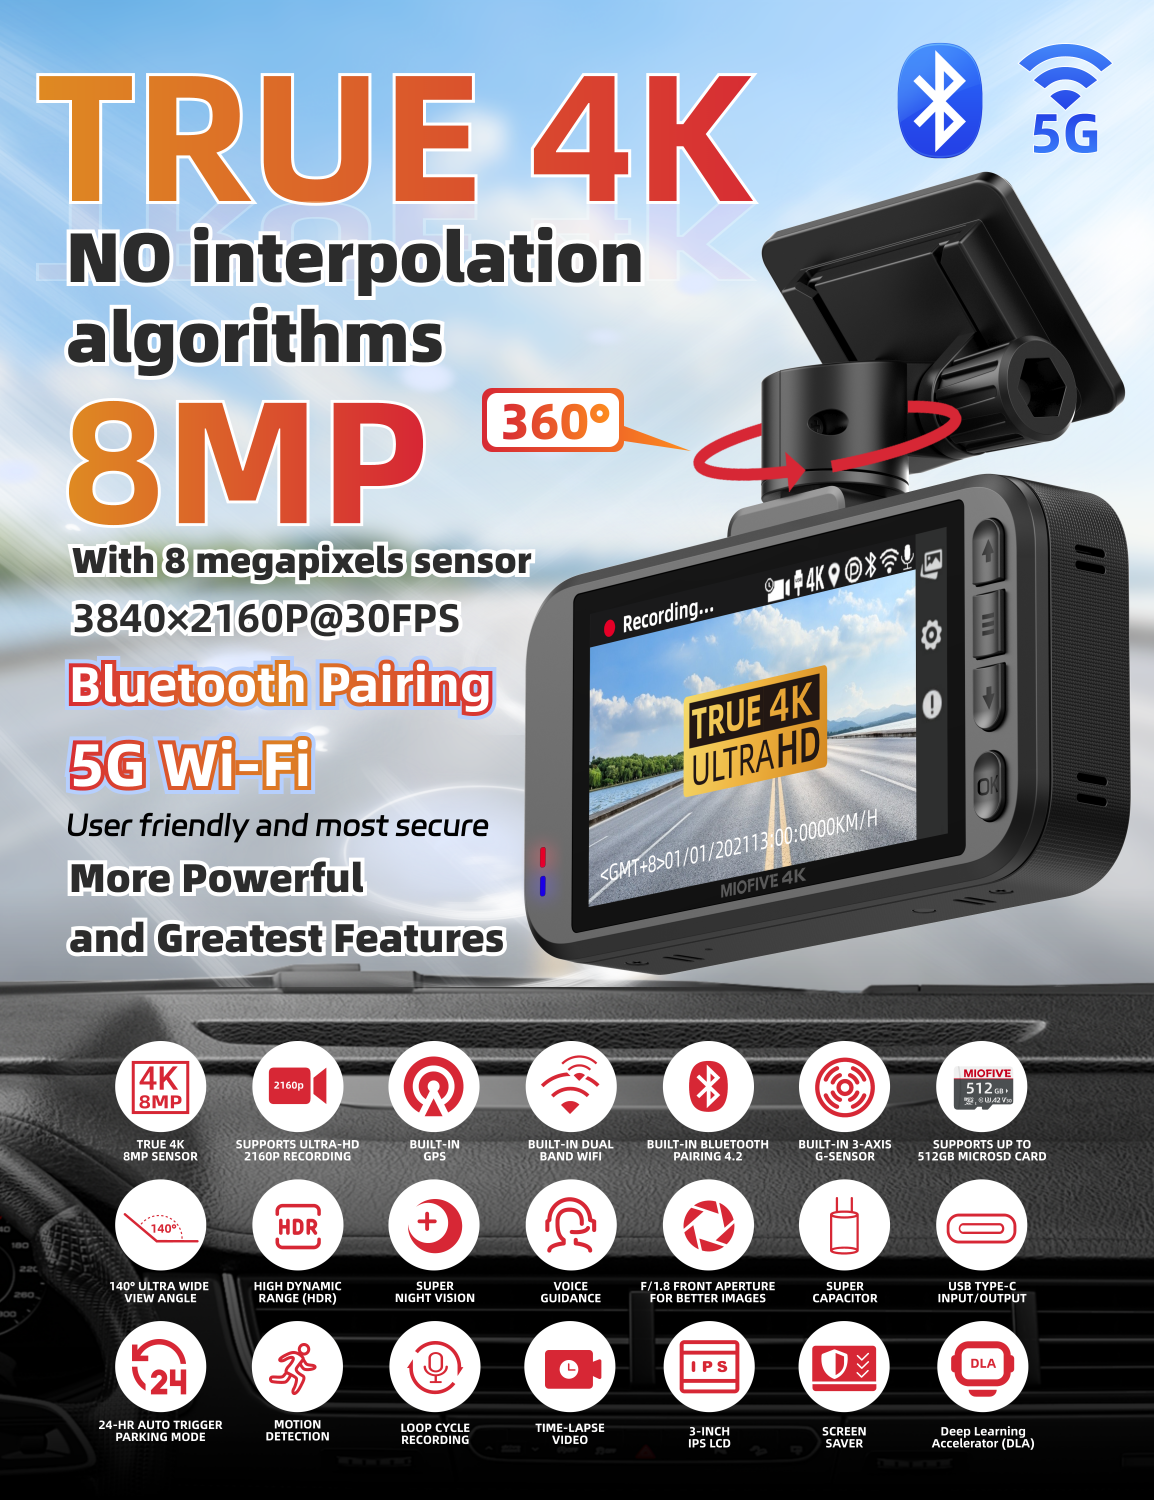 Miofive S1-4K Dash Cam, Built-In 5G WiFi & Bluetooth Pairing、GPS Car Dashboard Camera Recorder, 2160P UHD 30fps Dashcam with APP, 3.0" IPS Screen, HDR, Night Vision, 24H Parking Mode, Supports 512GB Max